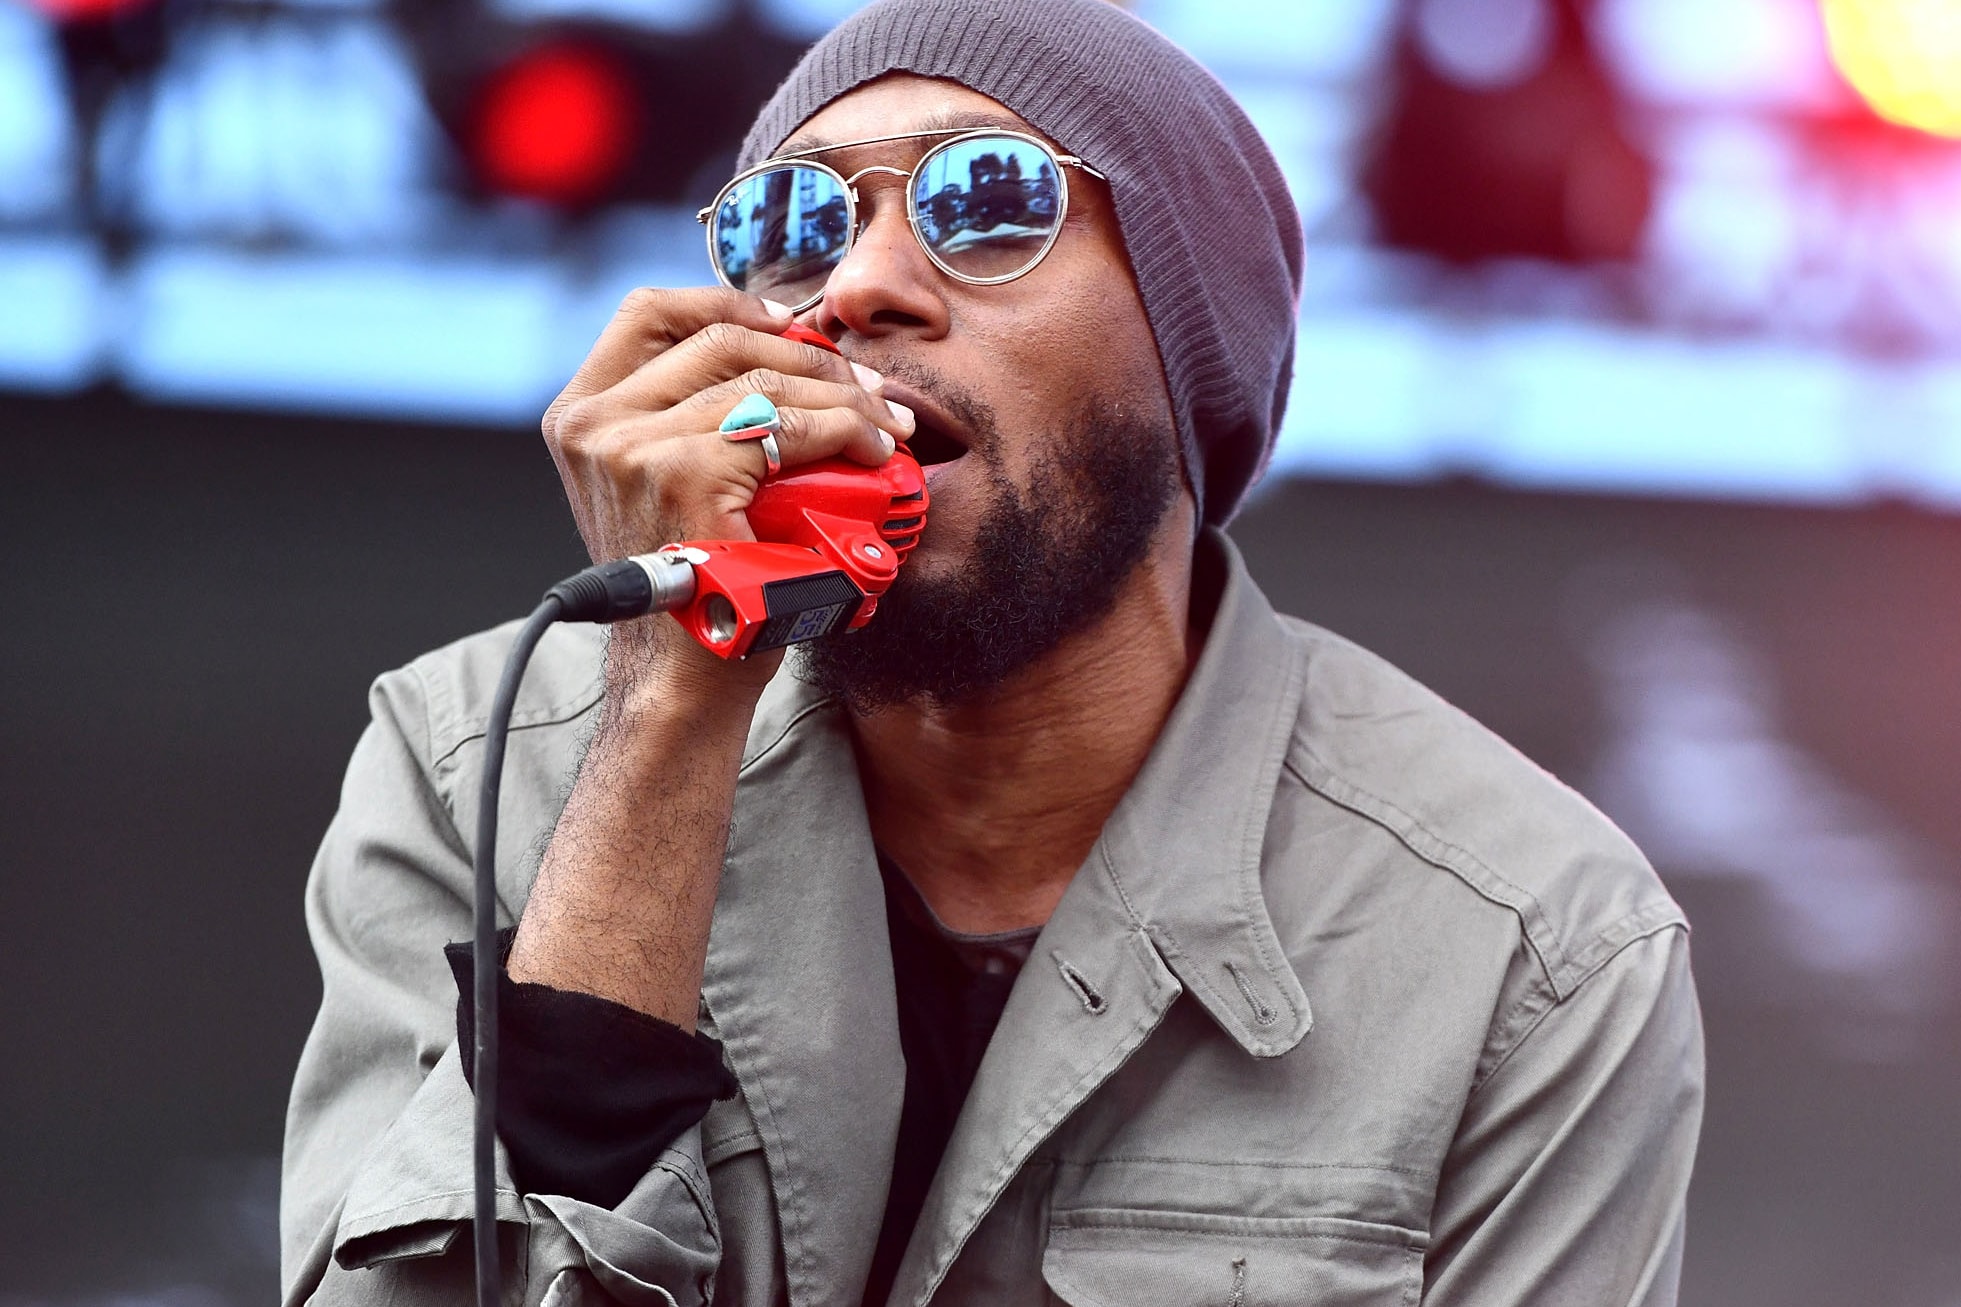 The Style Move We Can All Learn From Mos Def